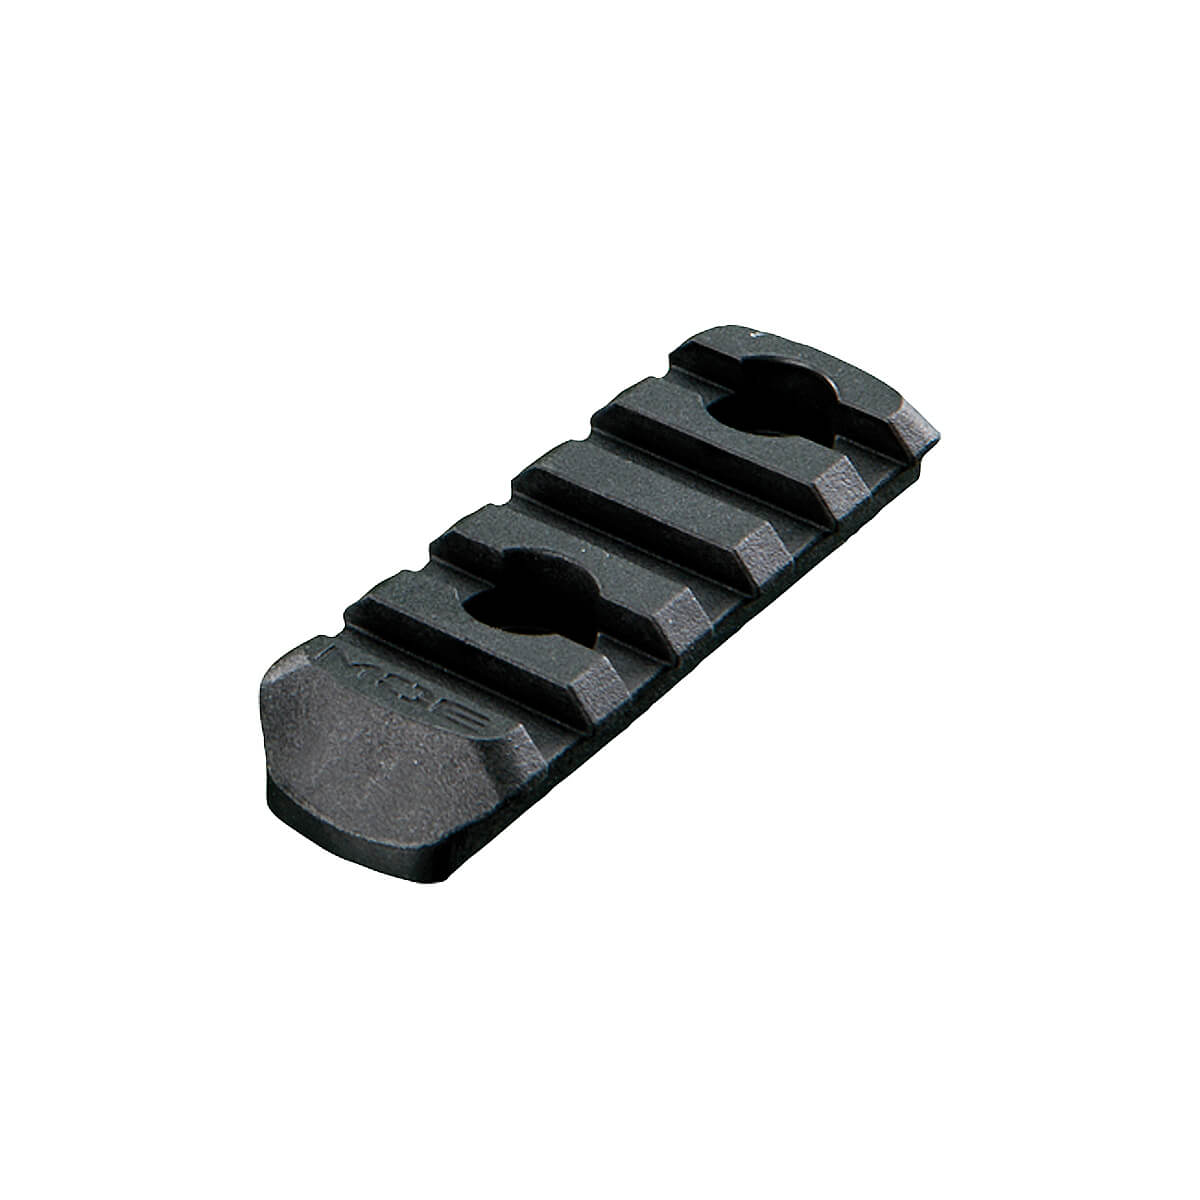 2 slot Set for Magpul  Hand Guards BLACK Polymer Rail Sections 